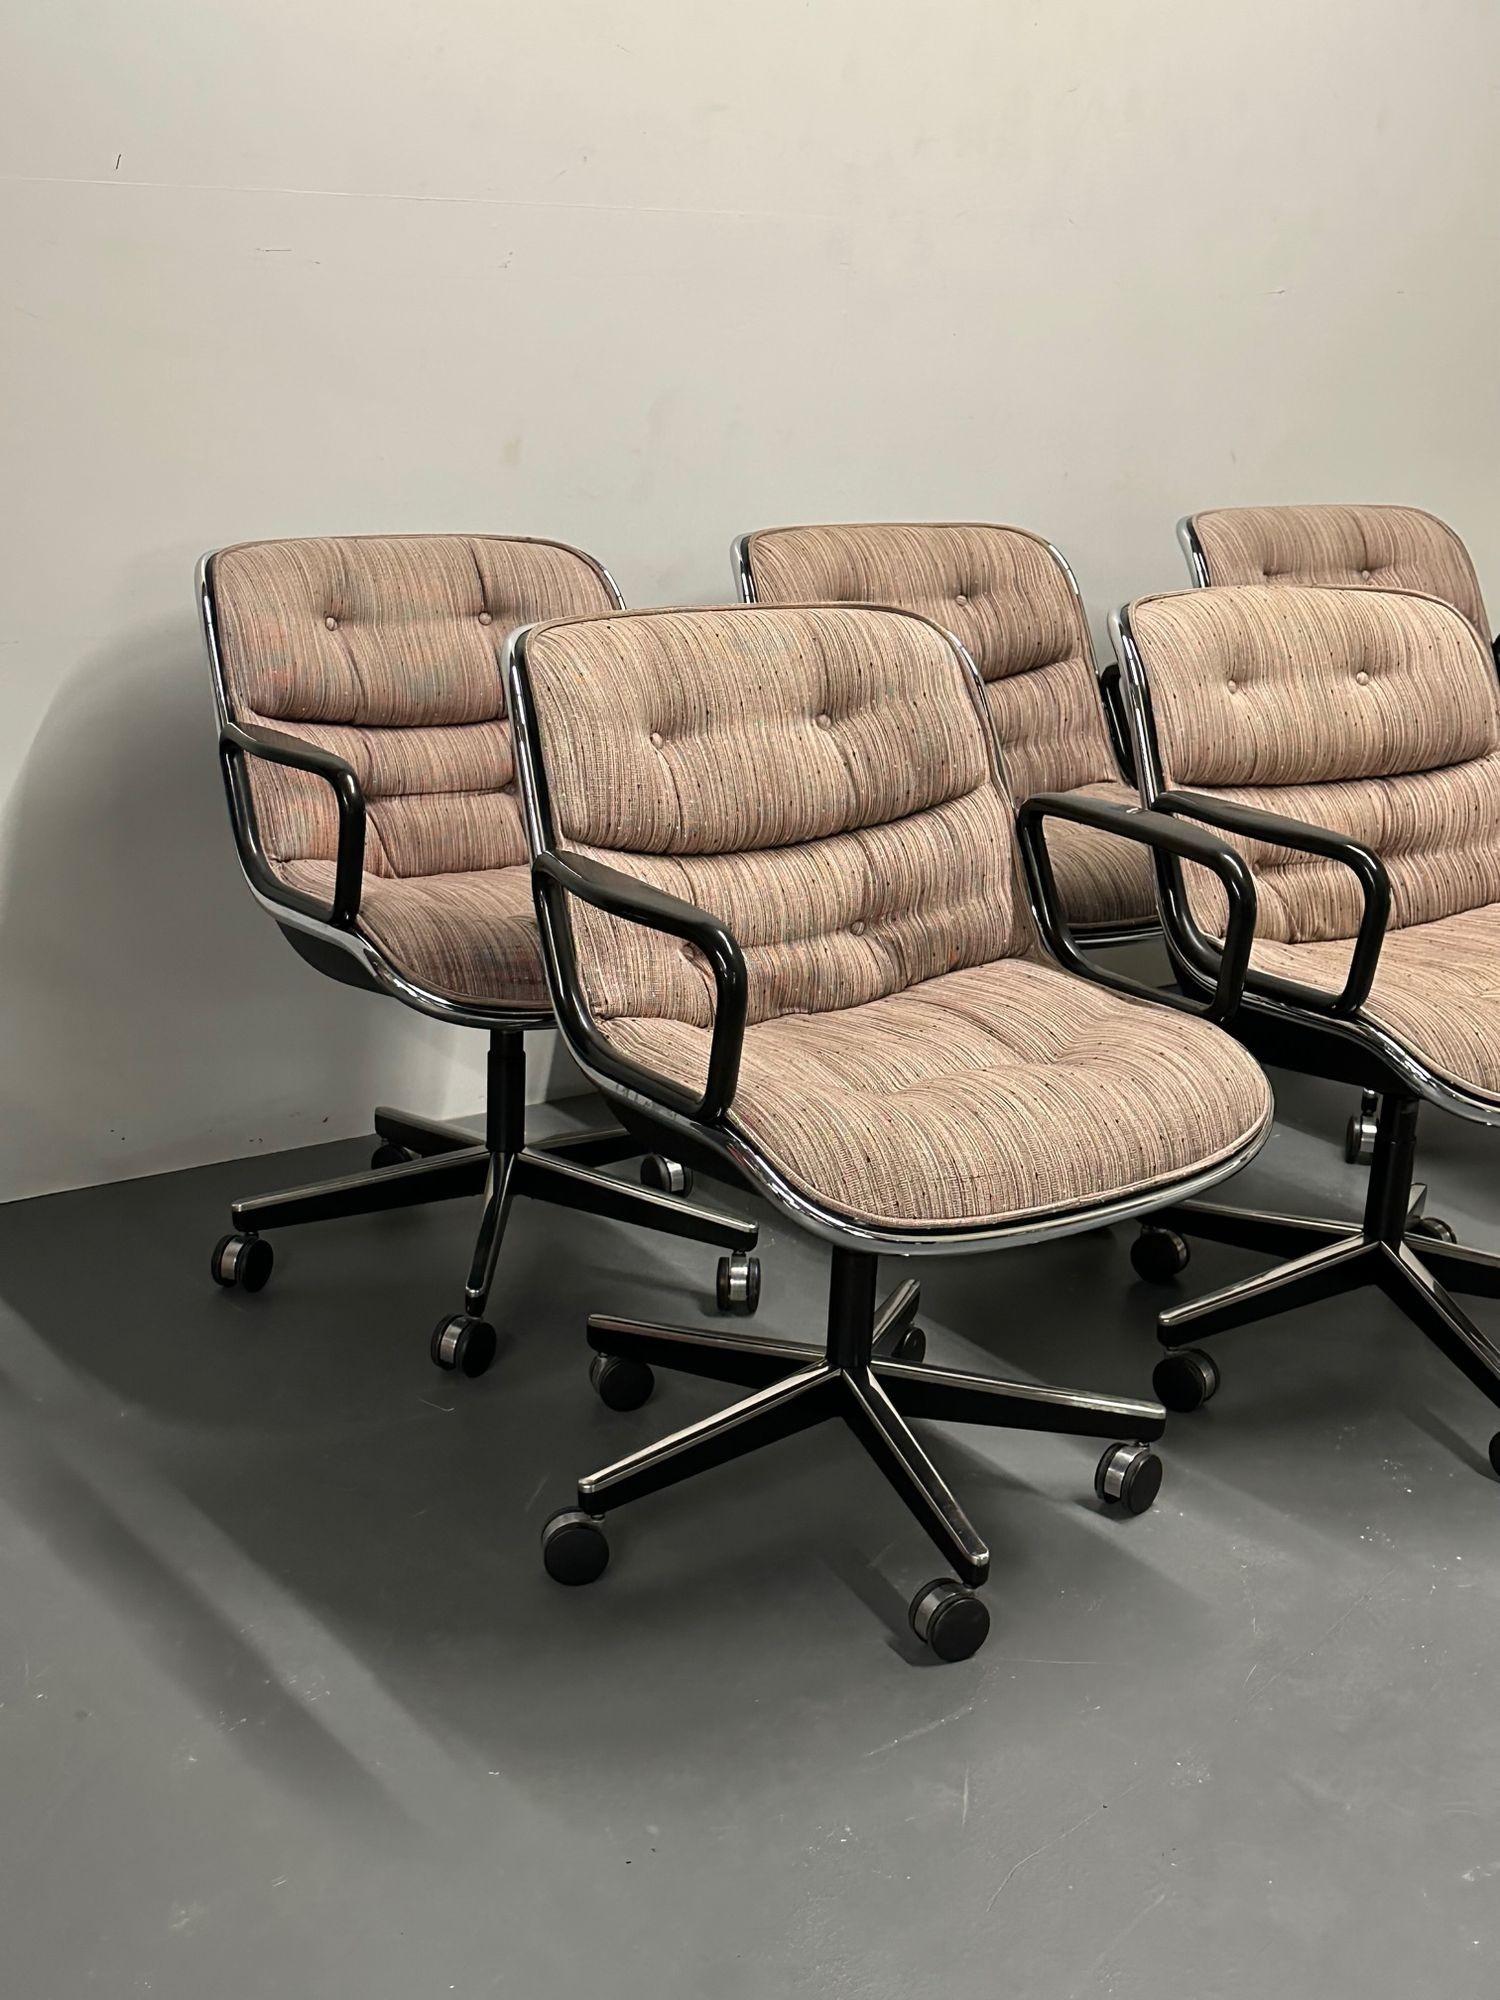 Late 20th Century Vintage Set of Six Charles Pollock for Knoll Rolling Office / Desk Chairs, 1985